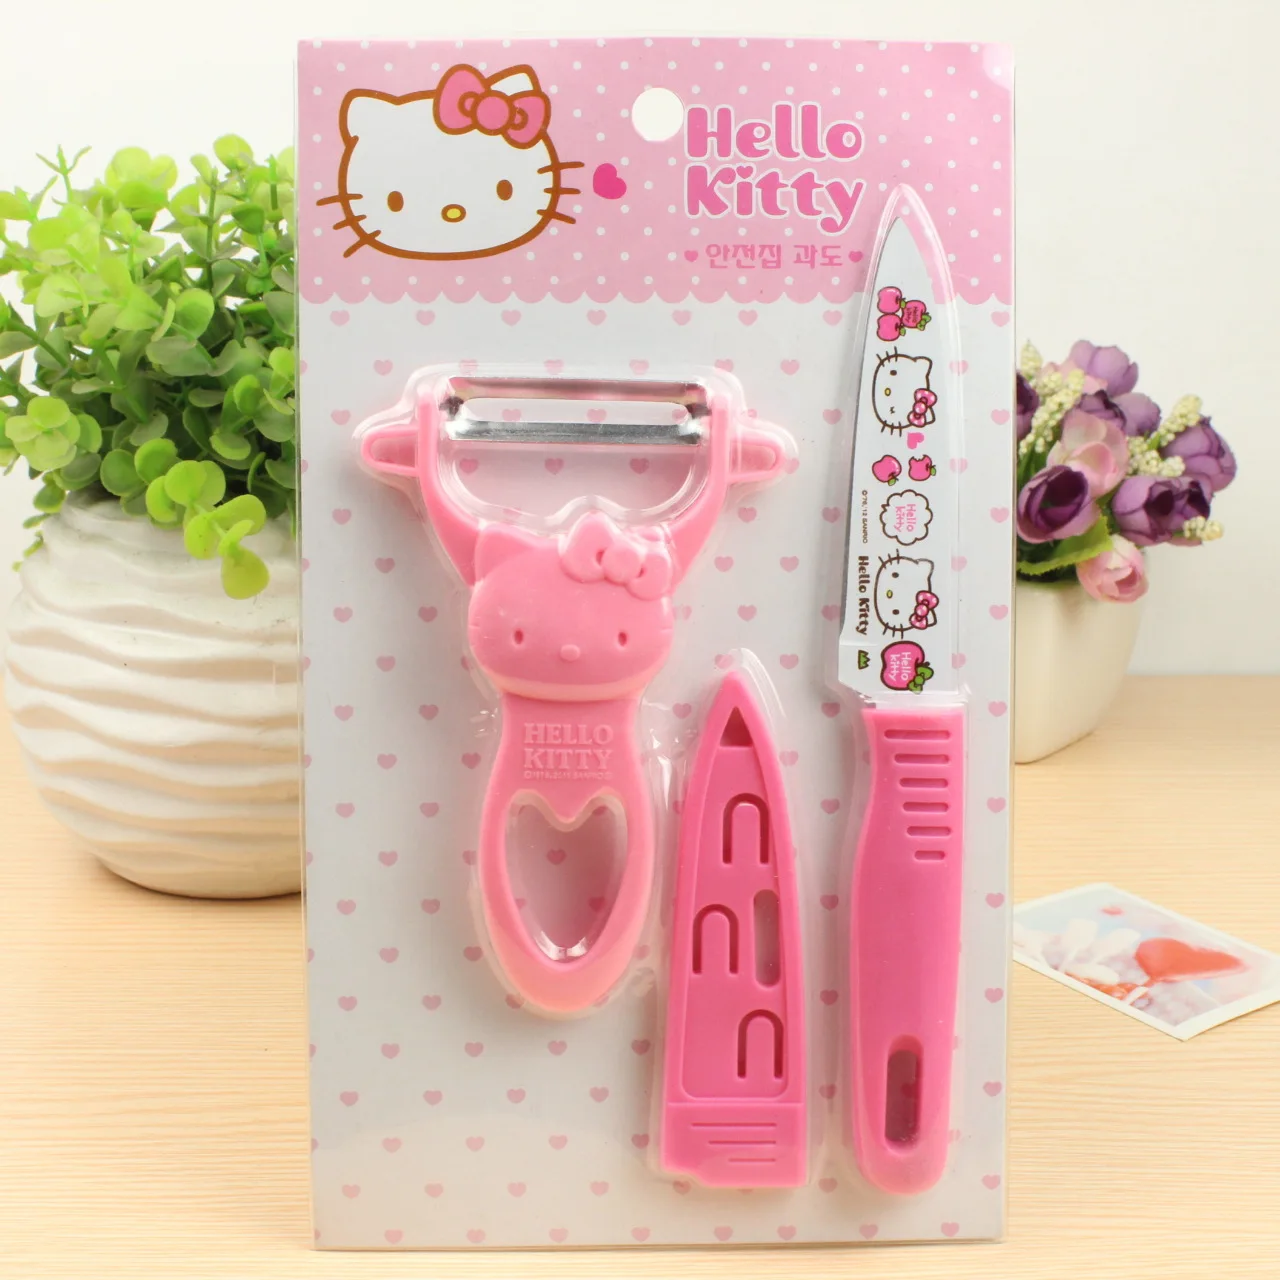 Hello Kitty Vegetable Knife and Fruit Peeler – Kitty Collection